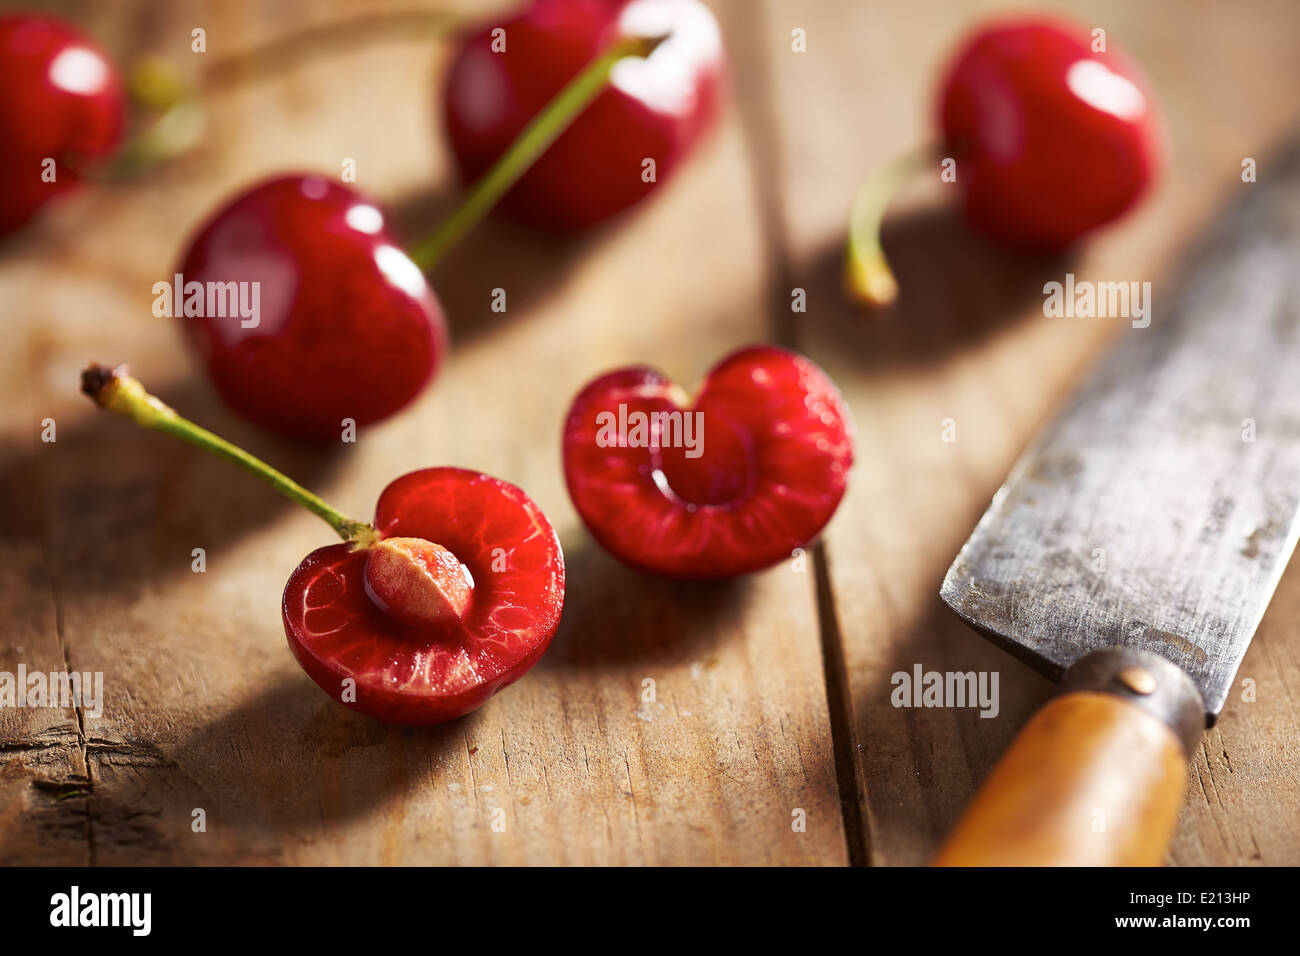 Red ripe open cherry on wooden background Stock Photo